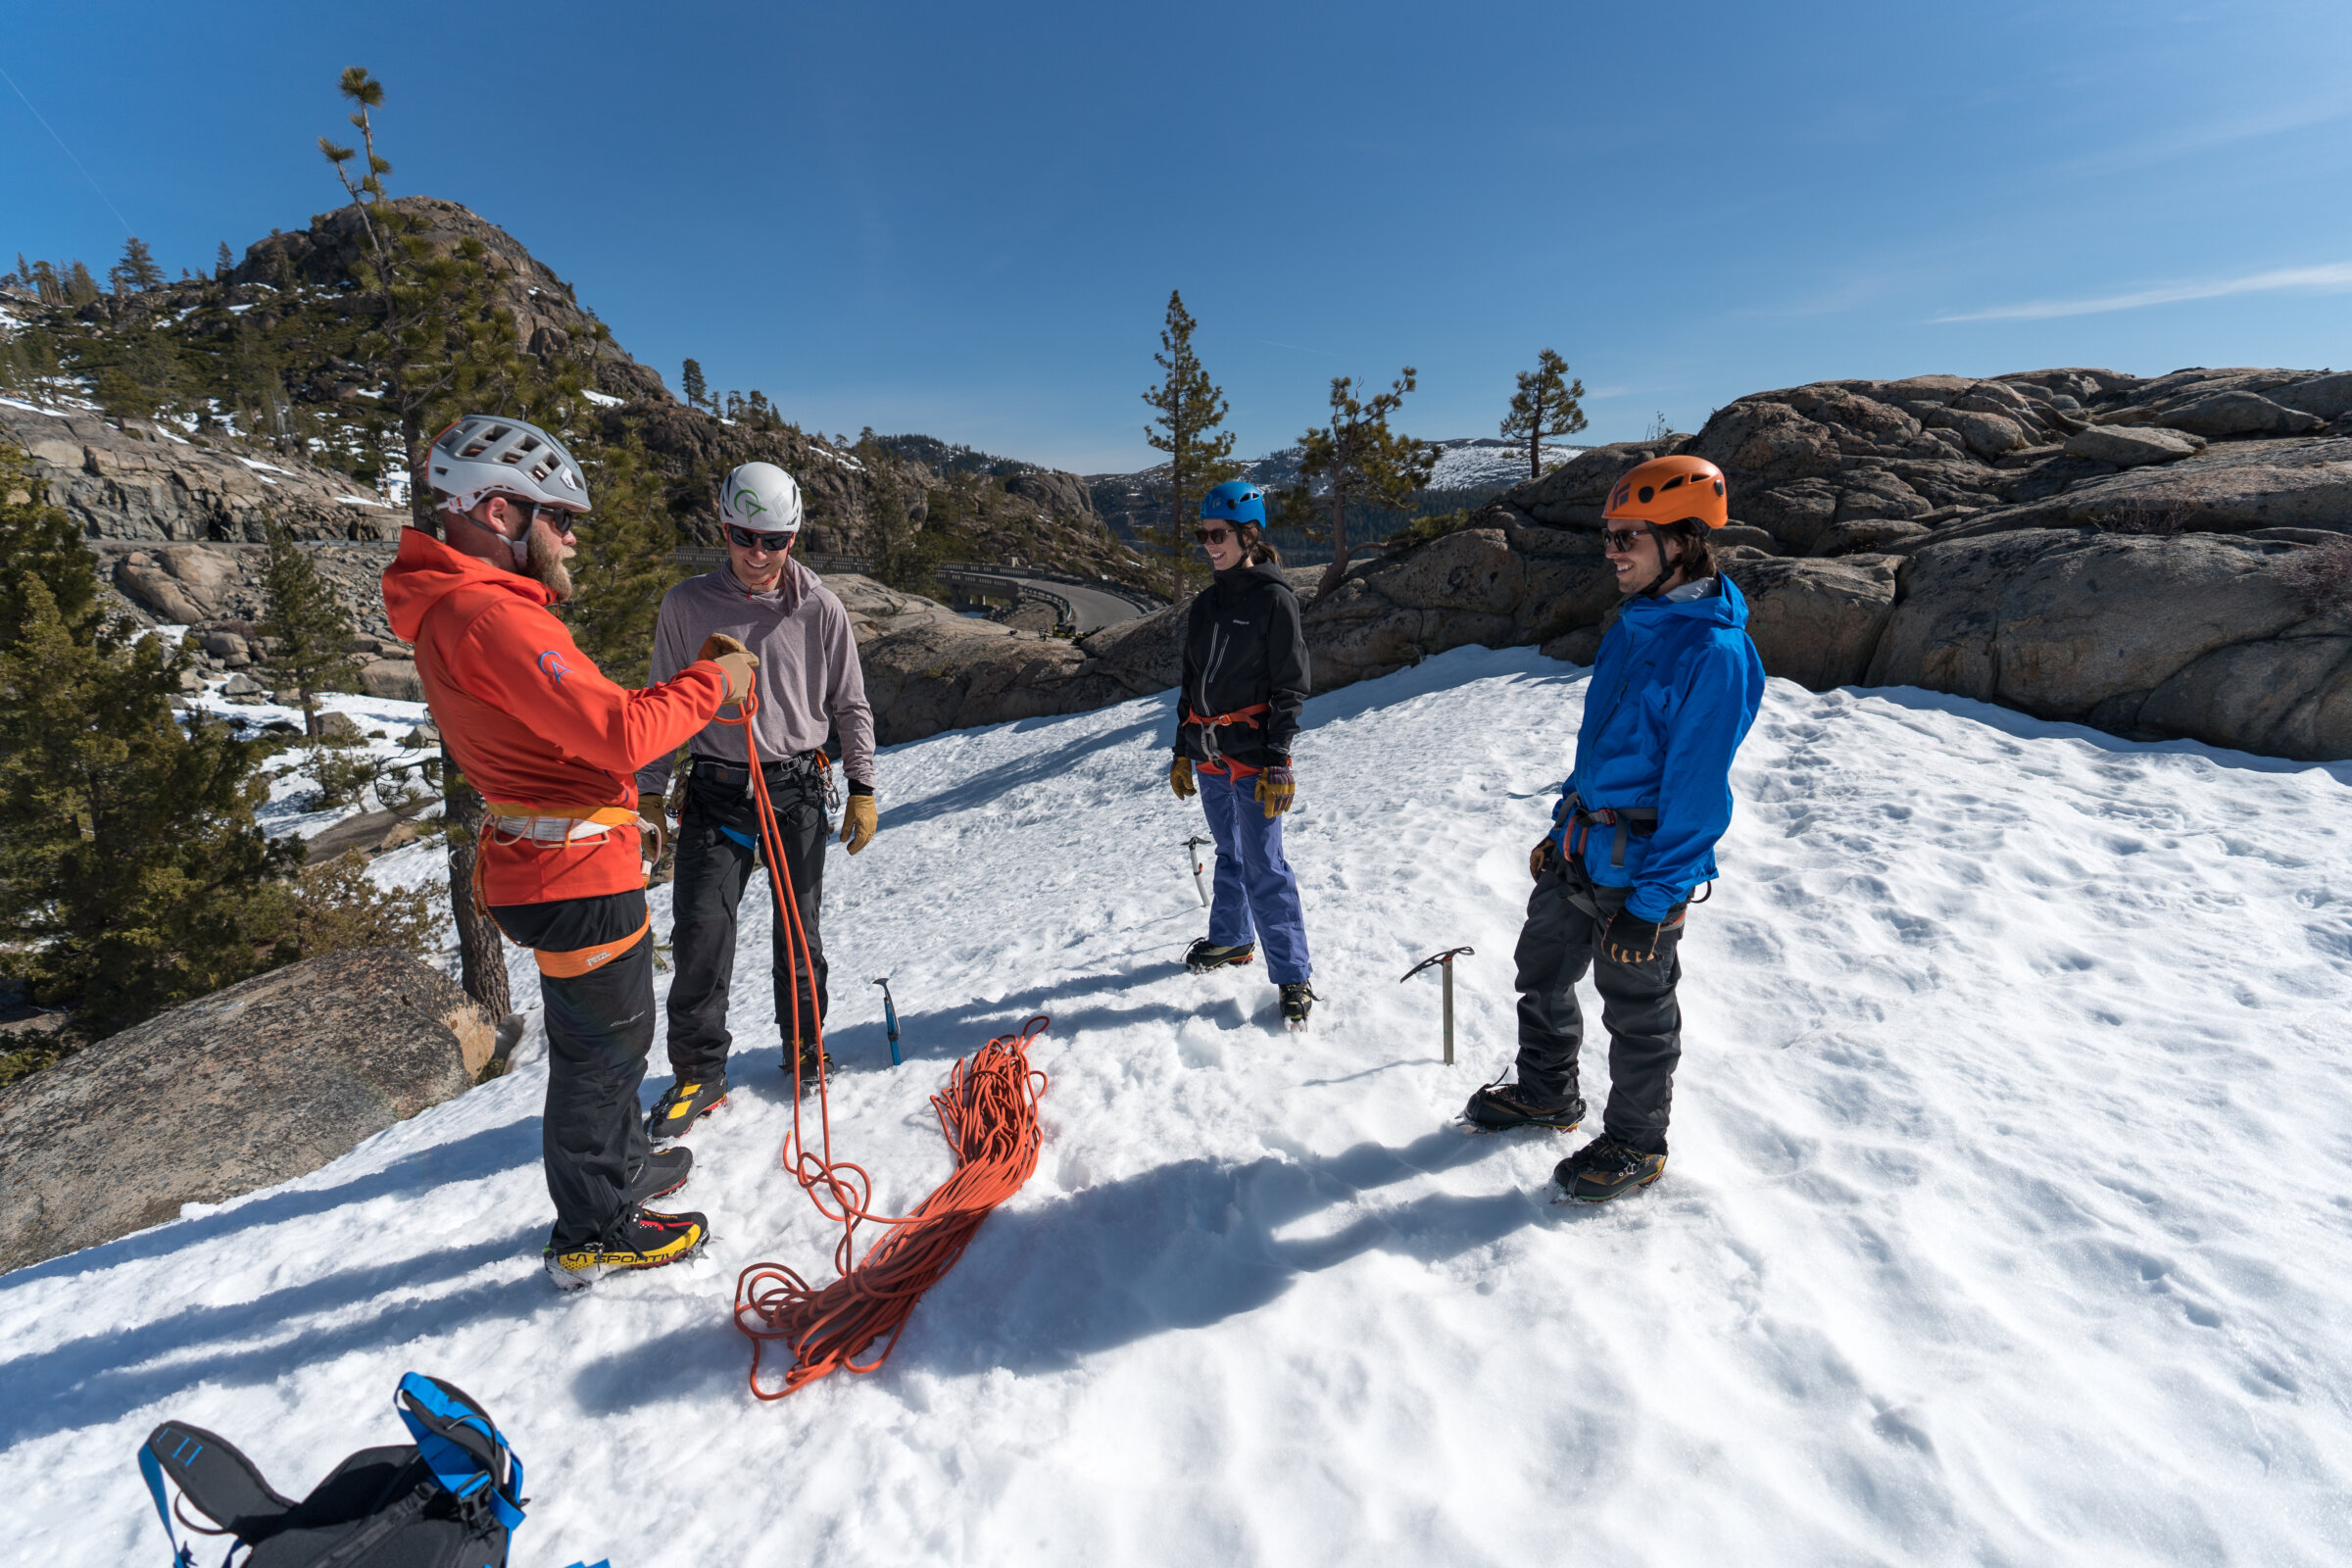 Intro to Mountaineering course near Lake Tahoe in the Sierra Nevada mountains with Alpenglow Expeditions' professional mountain guides.